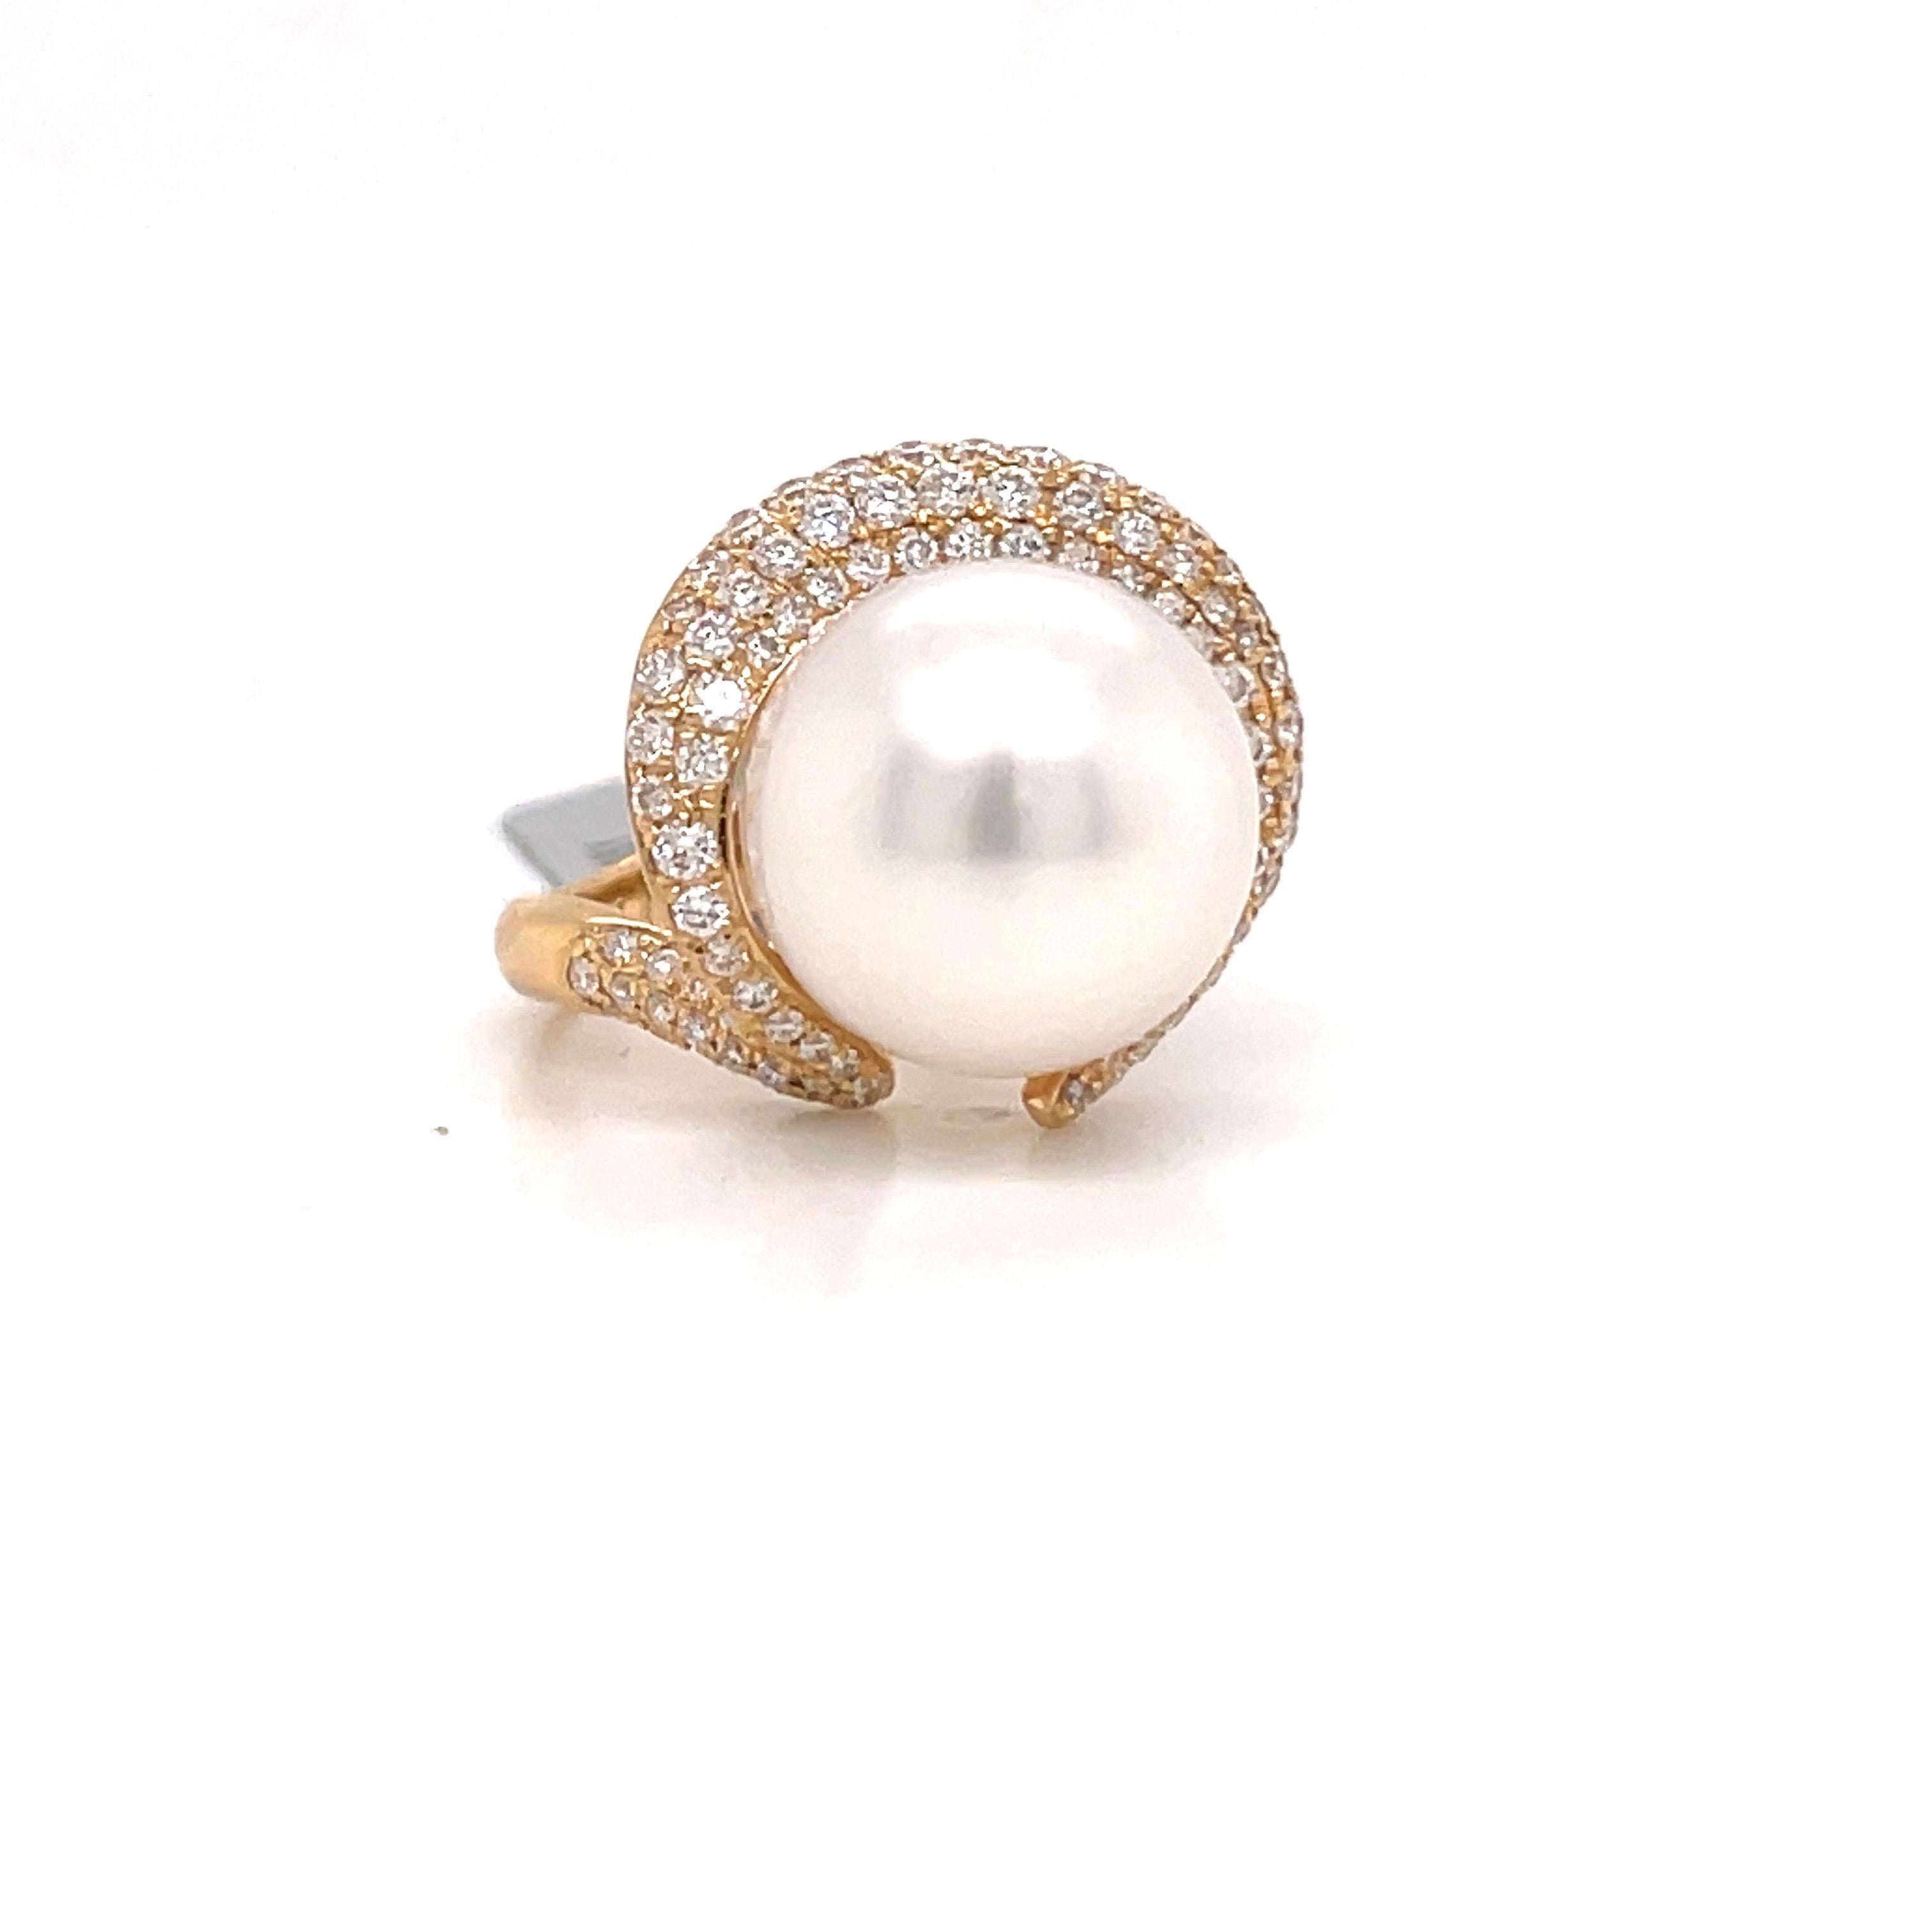 18 Karat Yellow gold ring featuring one South Sea Pearl measuring 13-14 MM flanked with 99 round brilliants weighing 0.84 carats.
Color G-H
Clarity SI
4.9 Grams
Nice Luster & Narce AA